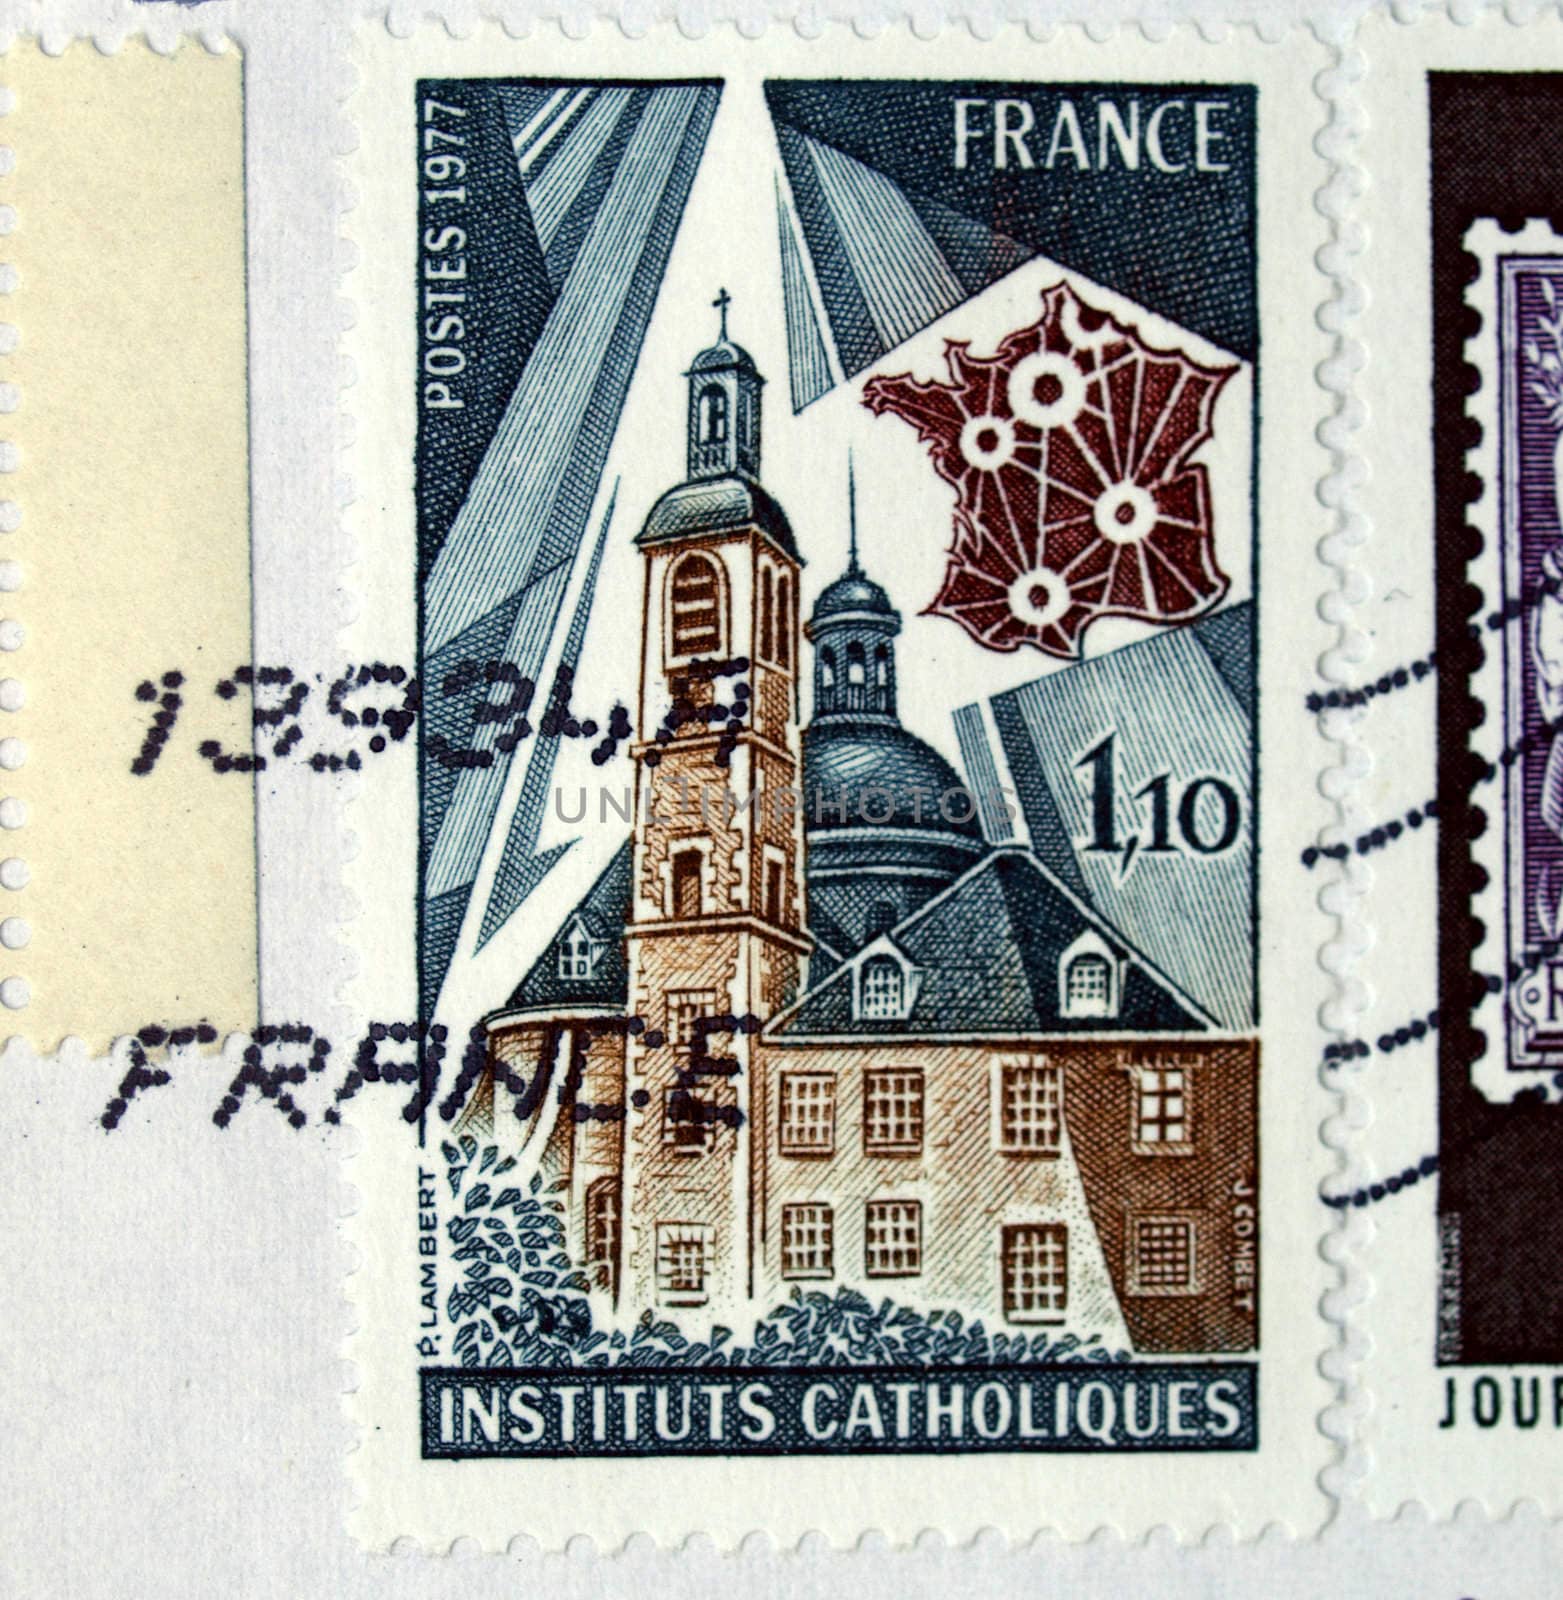 French stamp from France (in European Union)